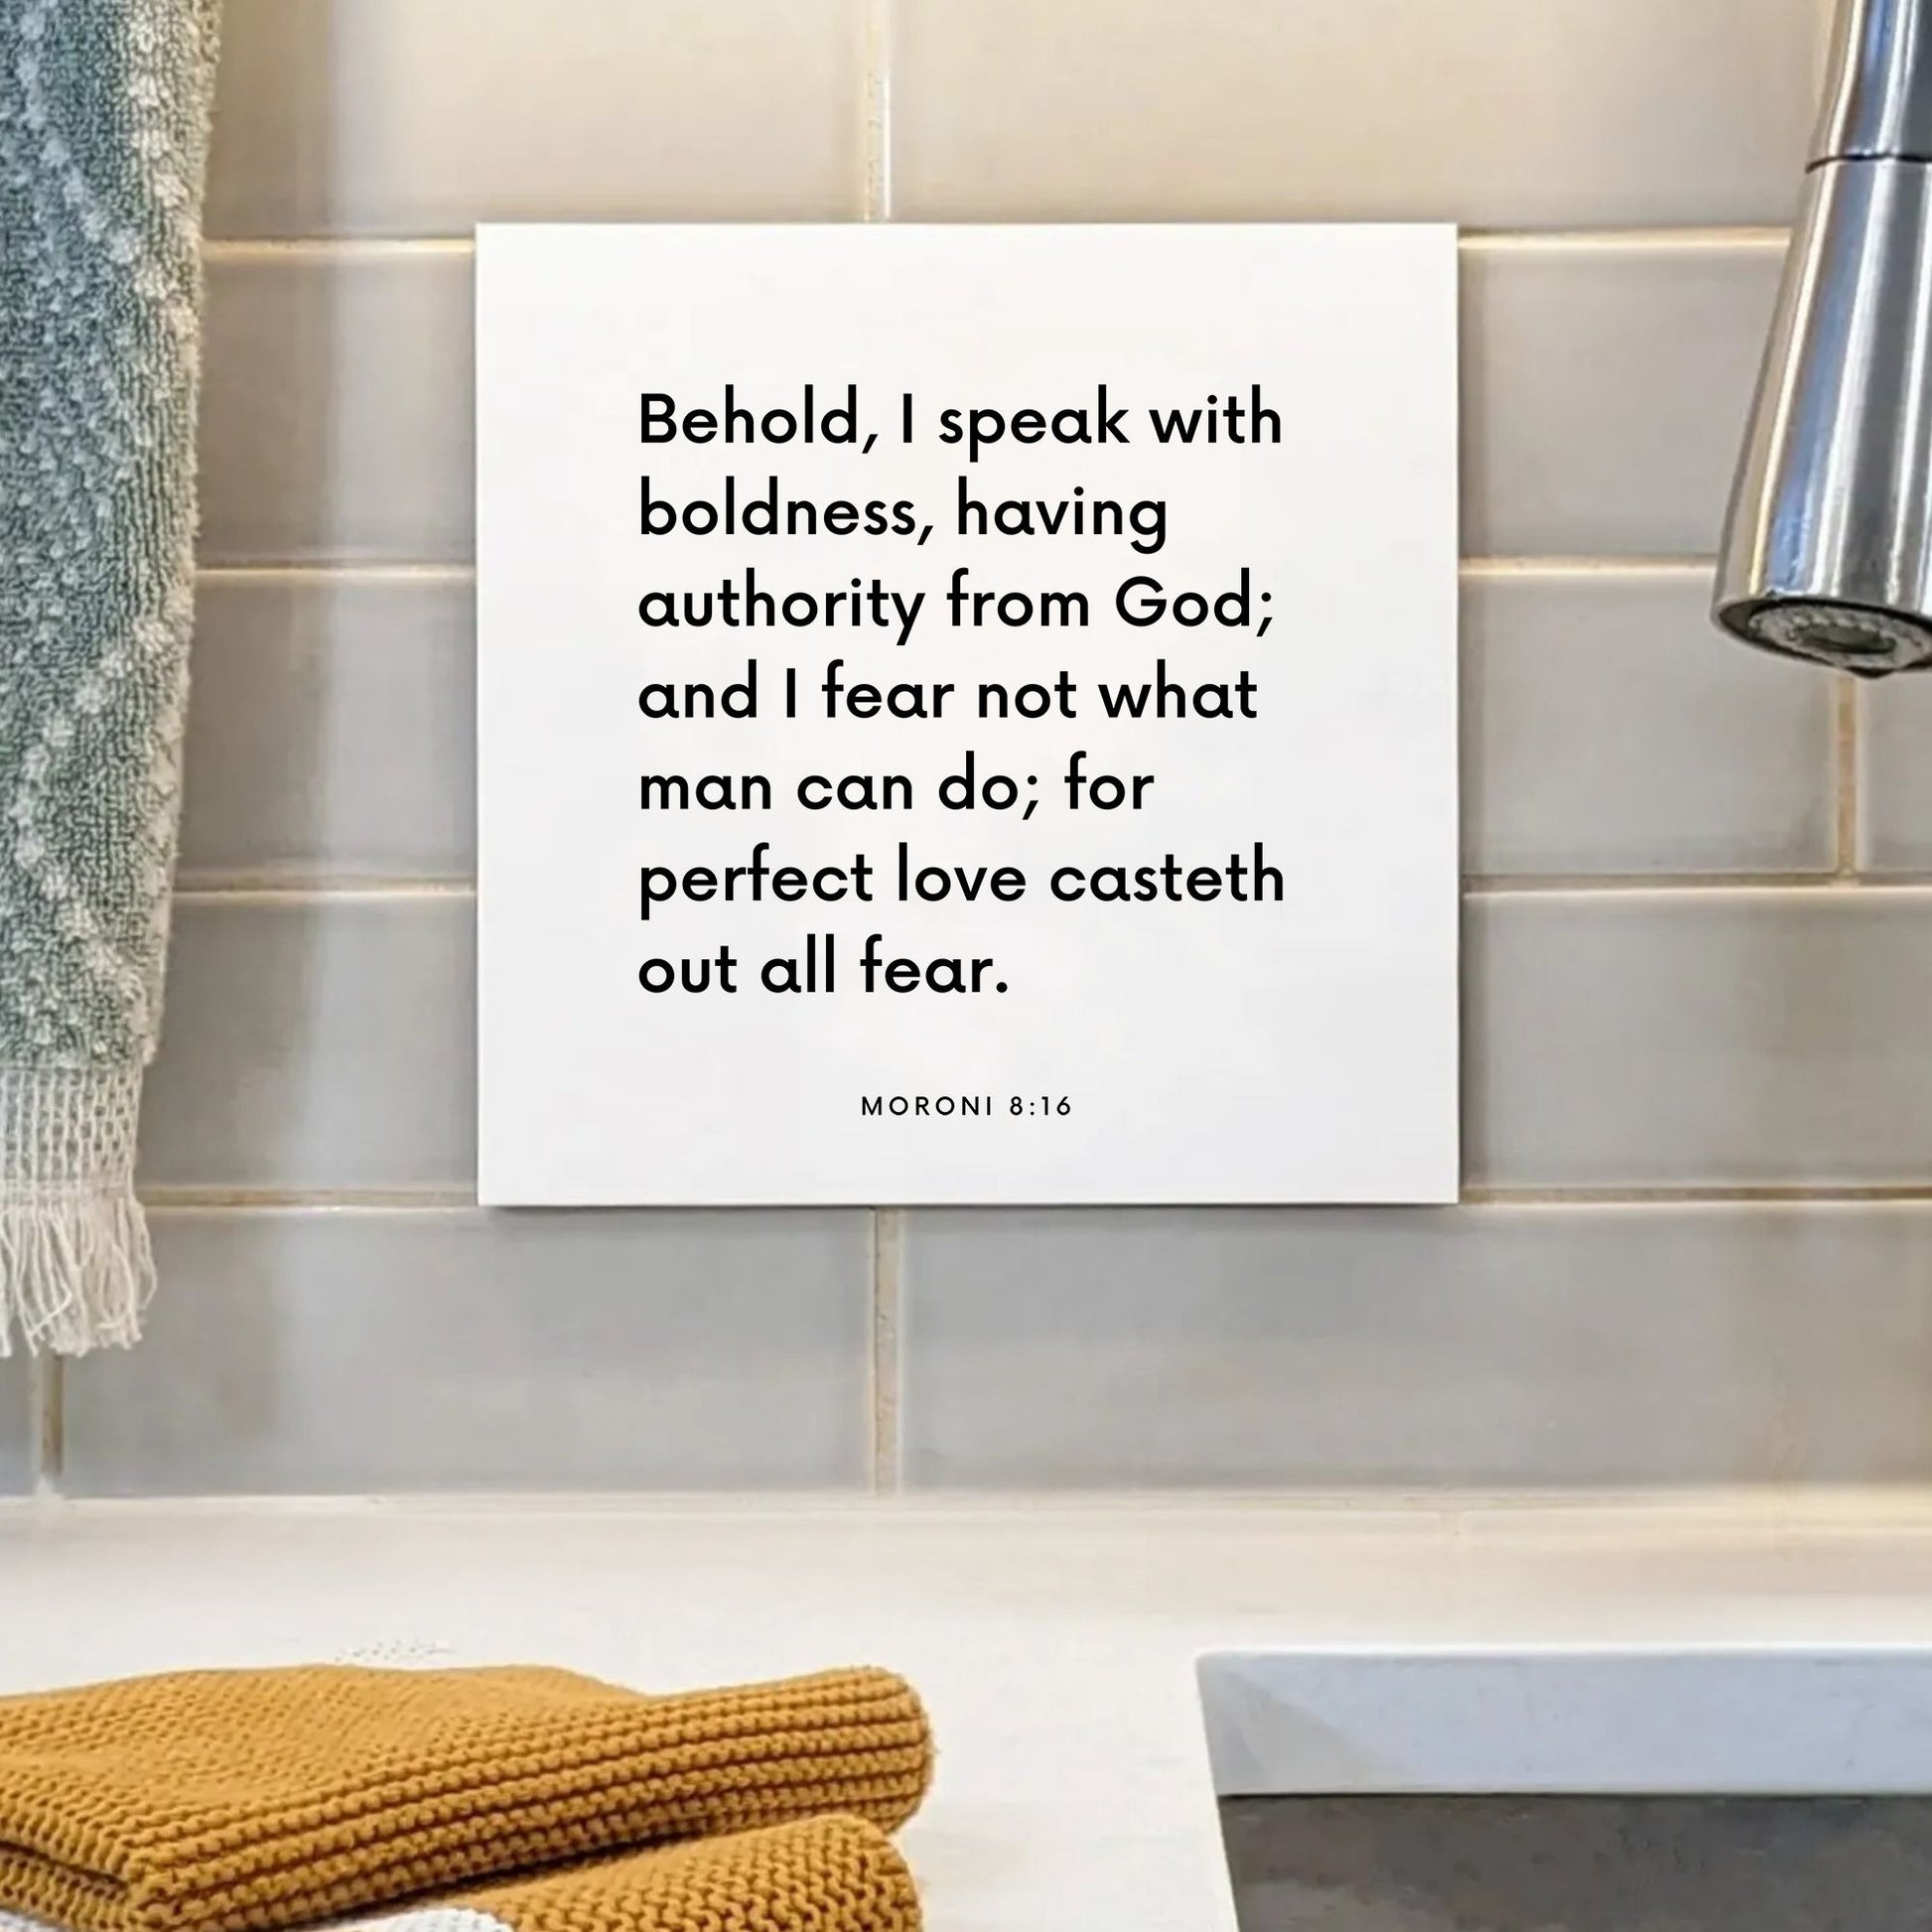 Sink mouting of the scripture tile for Moroni 8:16 - "Behold, I speak with boldness, having authority from God"